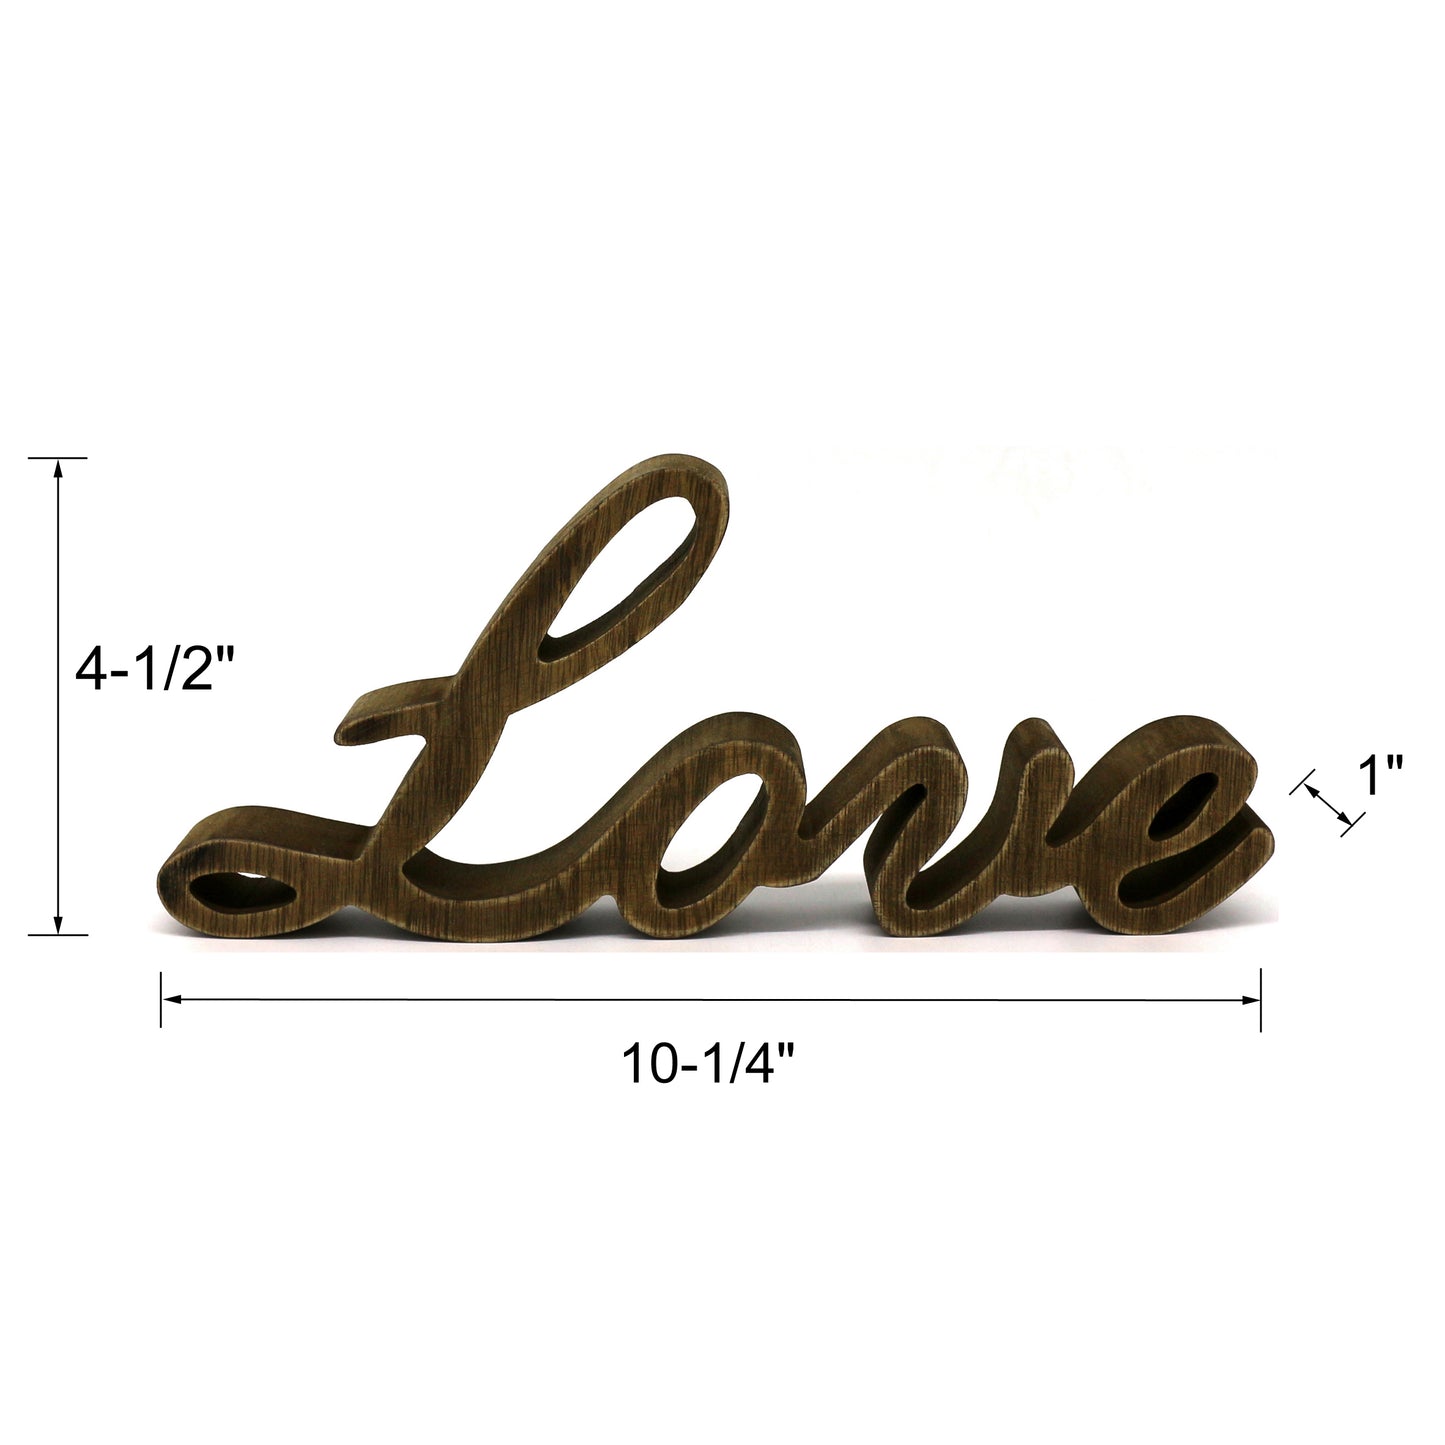 CVHOMEDECO. Rustic Vintage Distressed Wooden Words Sign Free Standing "Love" Tabletop/Shelf/Home Wall/Office Decoration Art, 10.25 x 4.5 x 1 Inch